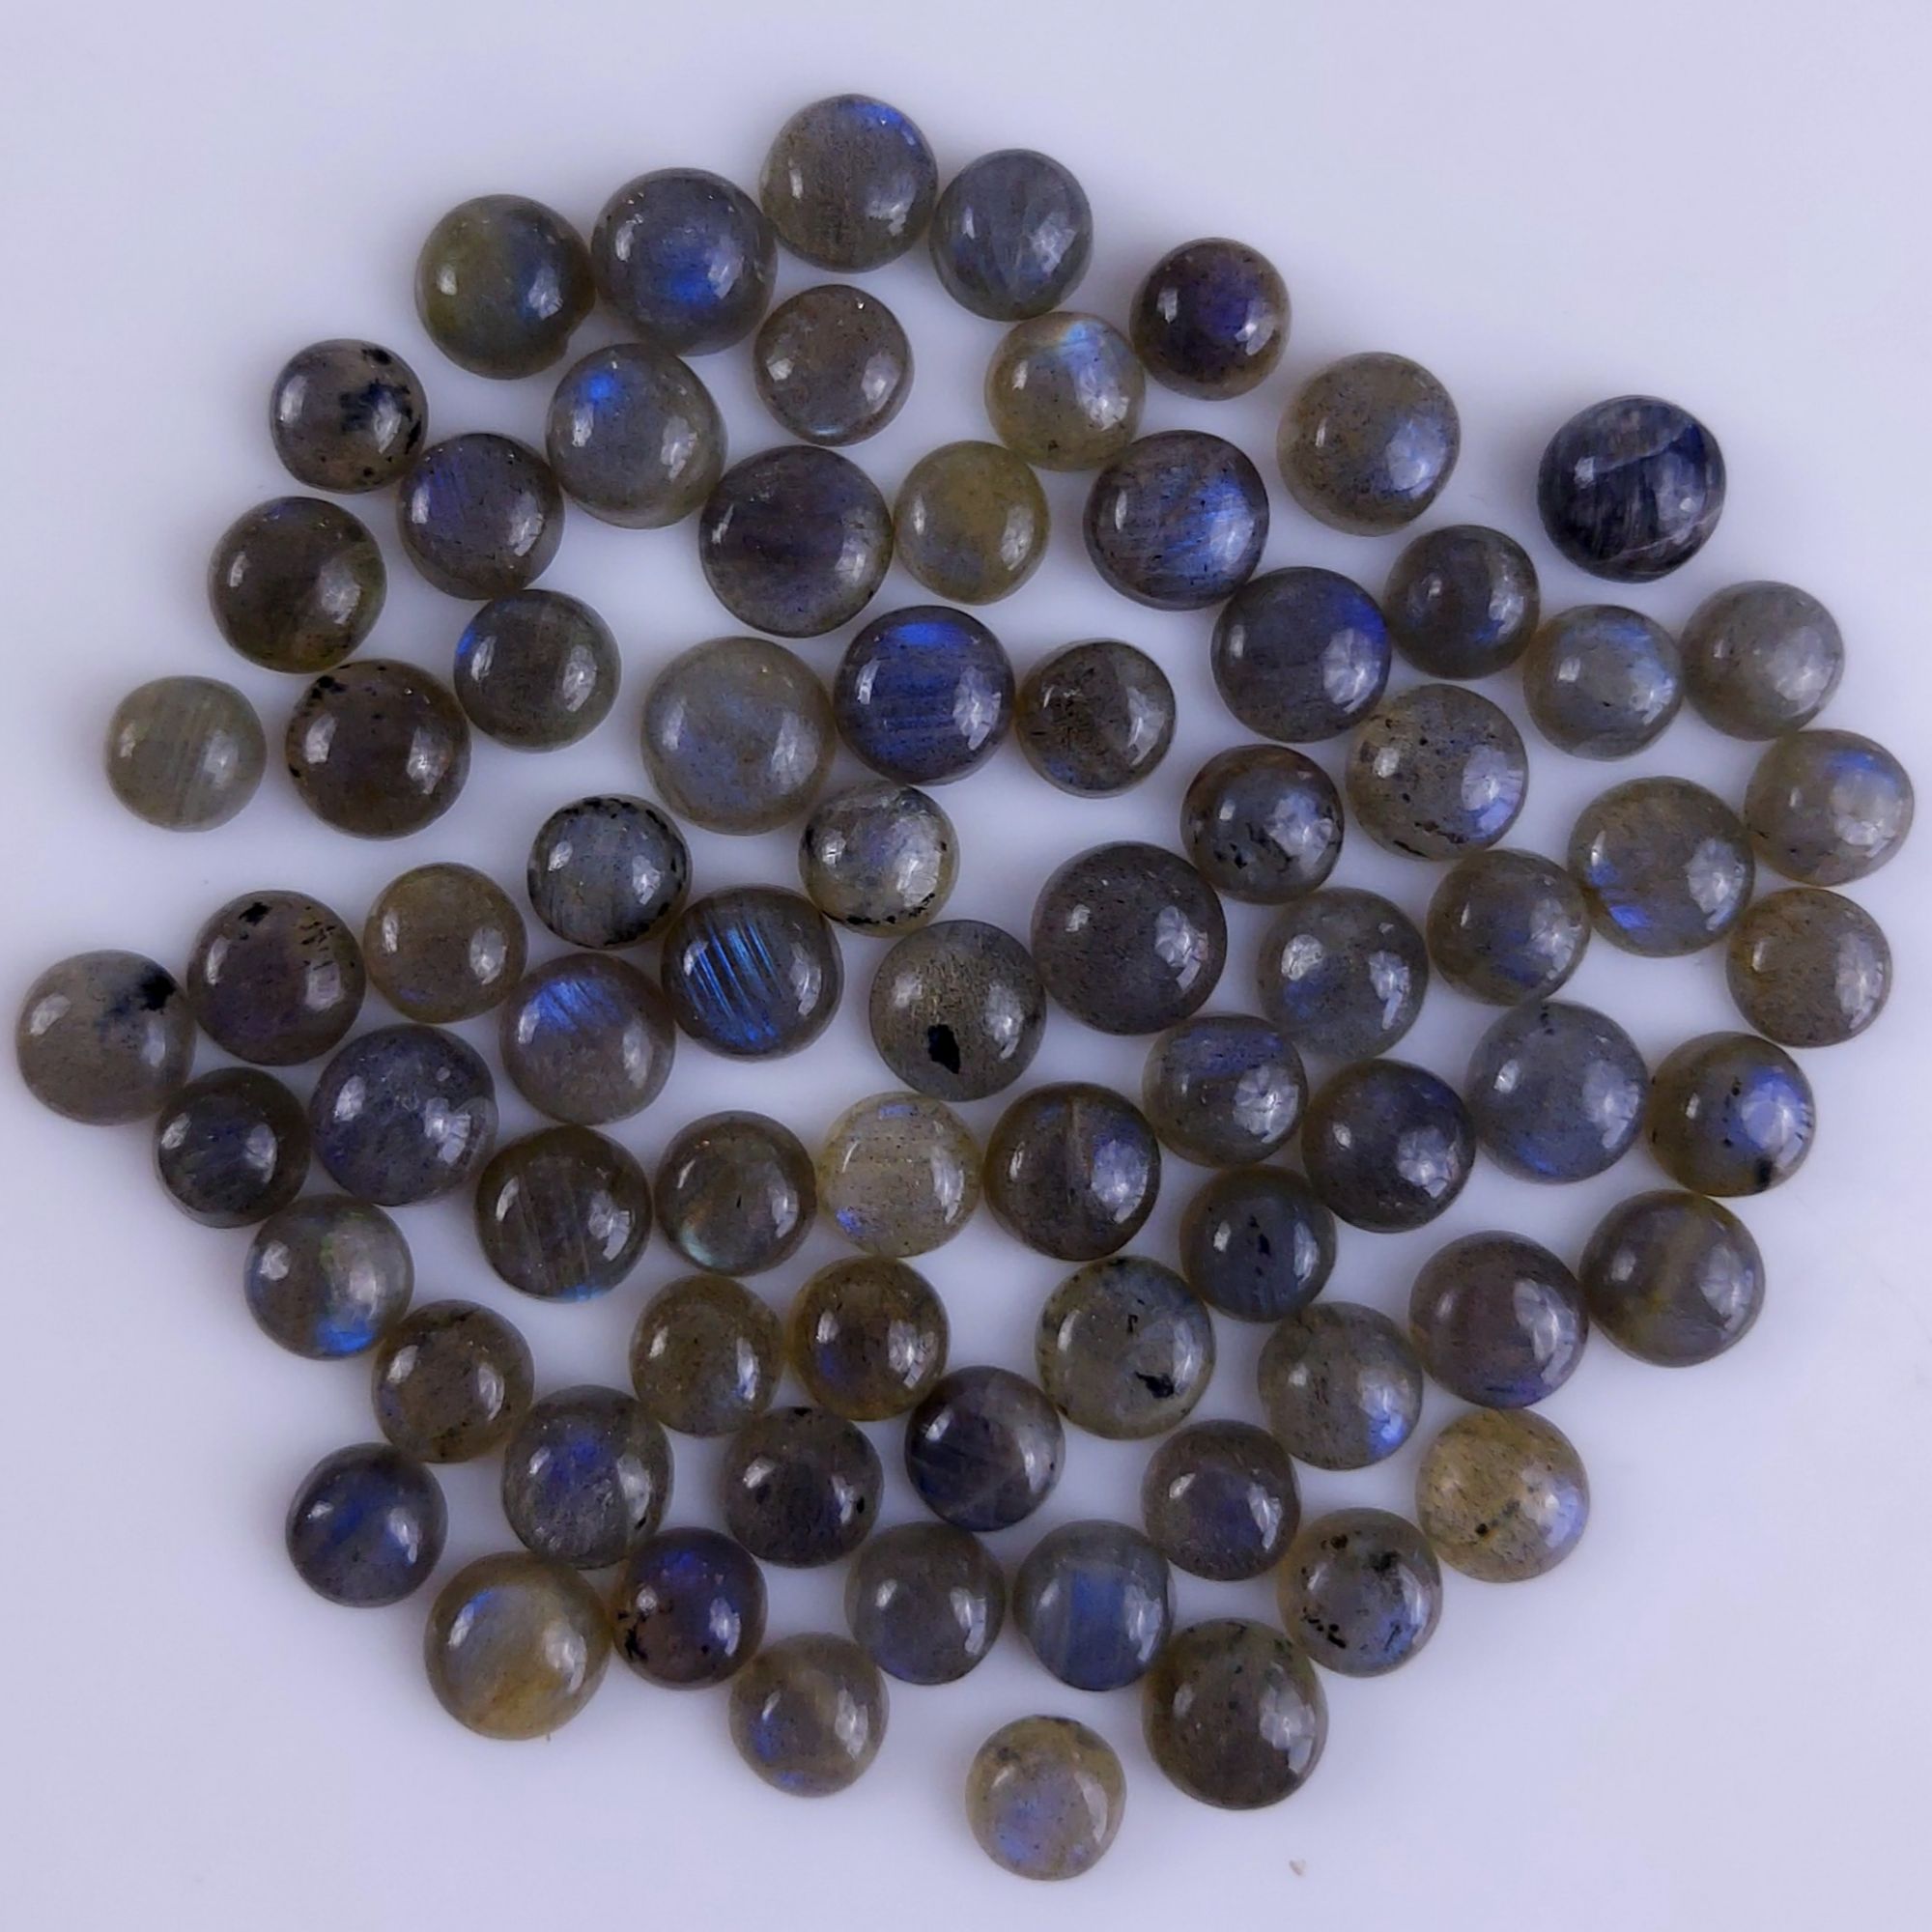 75Pcs 193Cts Natural Blue Labradorite Calibrated Cabochon Round Shape Gemstone Lot For Jewelry Making 7x7mm#758